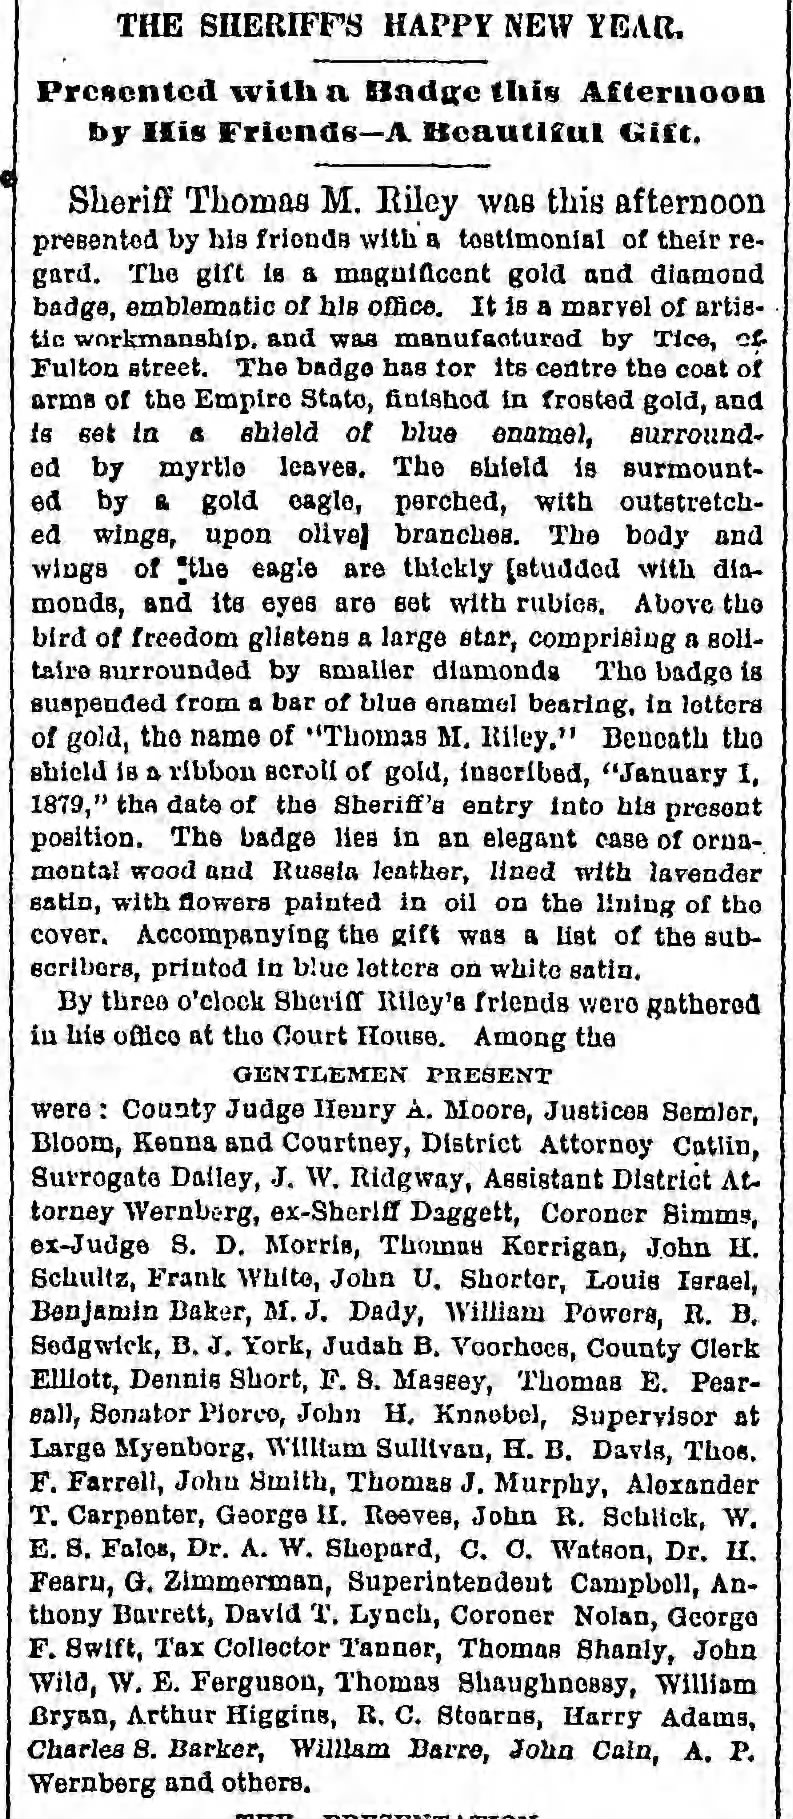 Wednesday, December 31, 1879 - Page 4